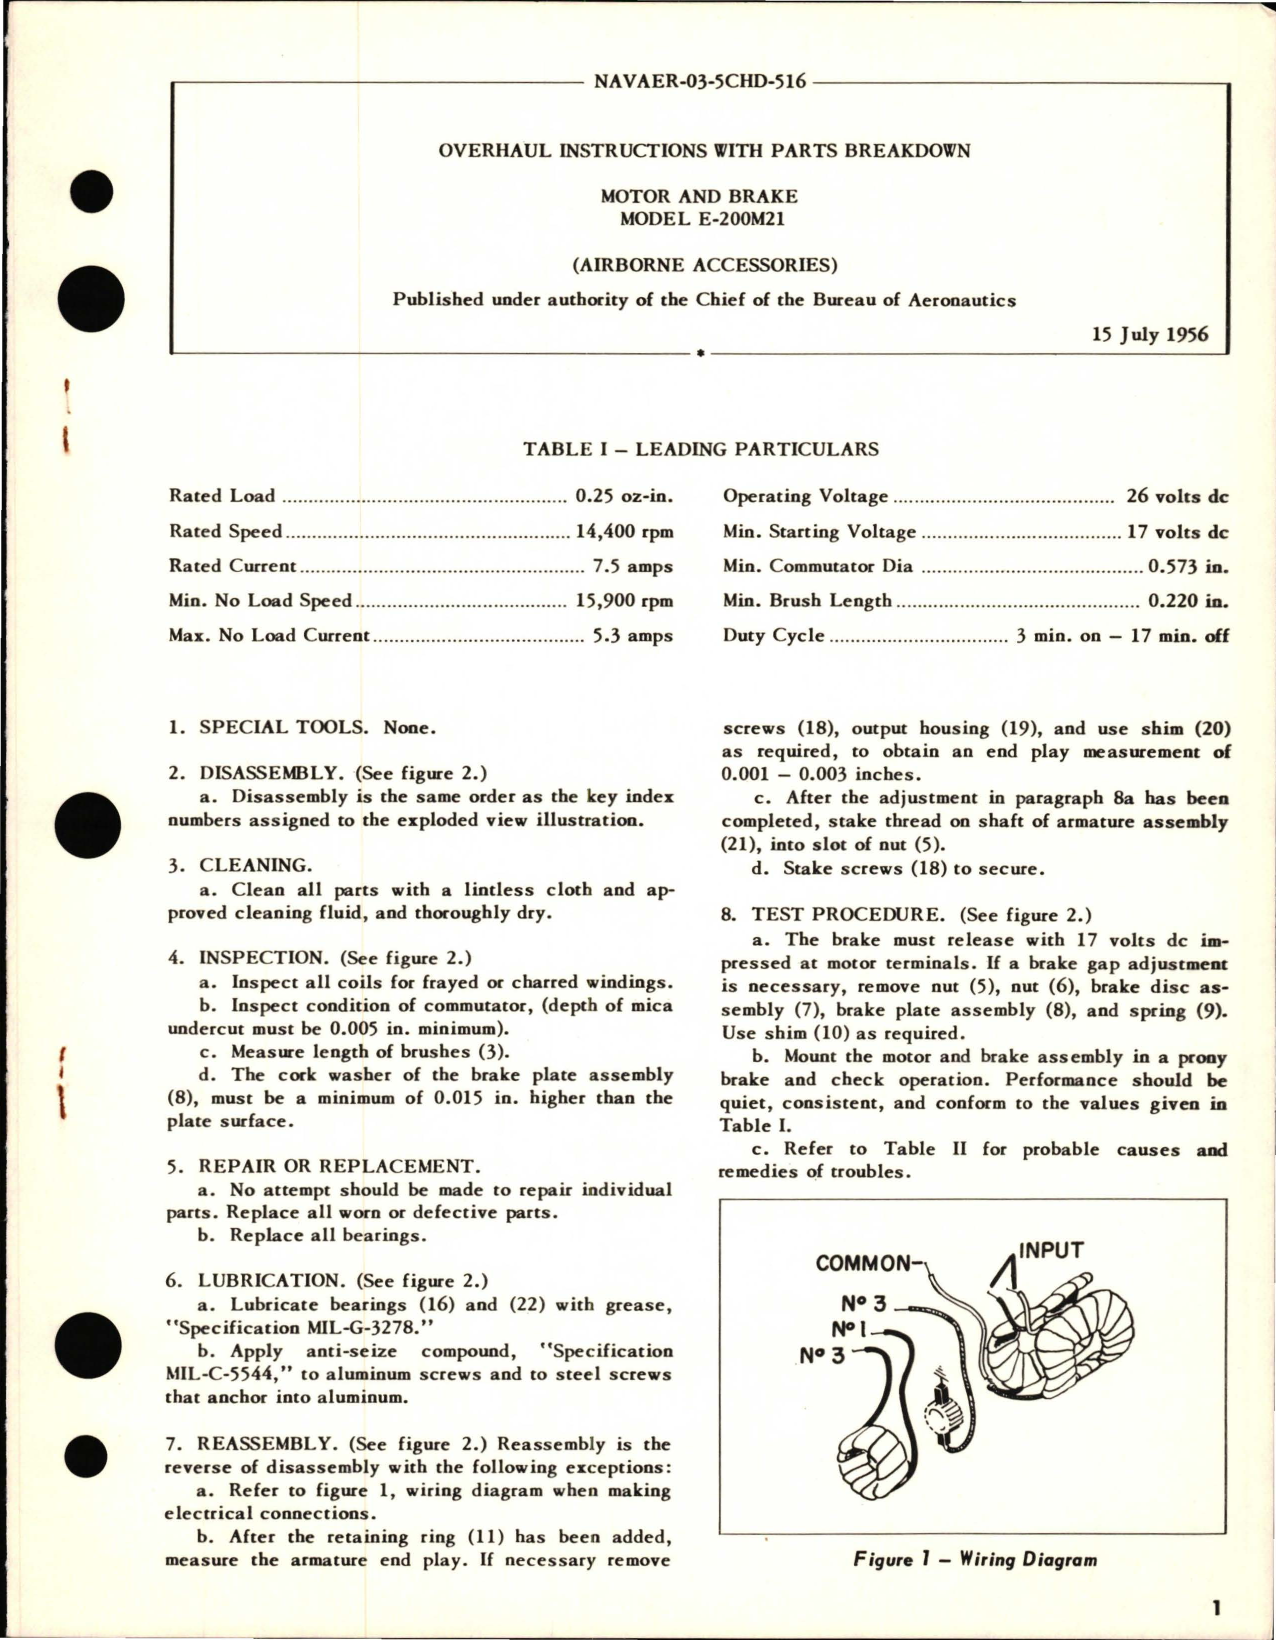 Sample page 1 from AirCorps Library document: Overhaul Instructions with Parts Breakdown for Motor and Brake Model E-200M21